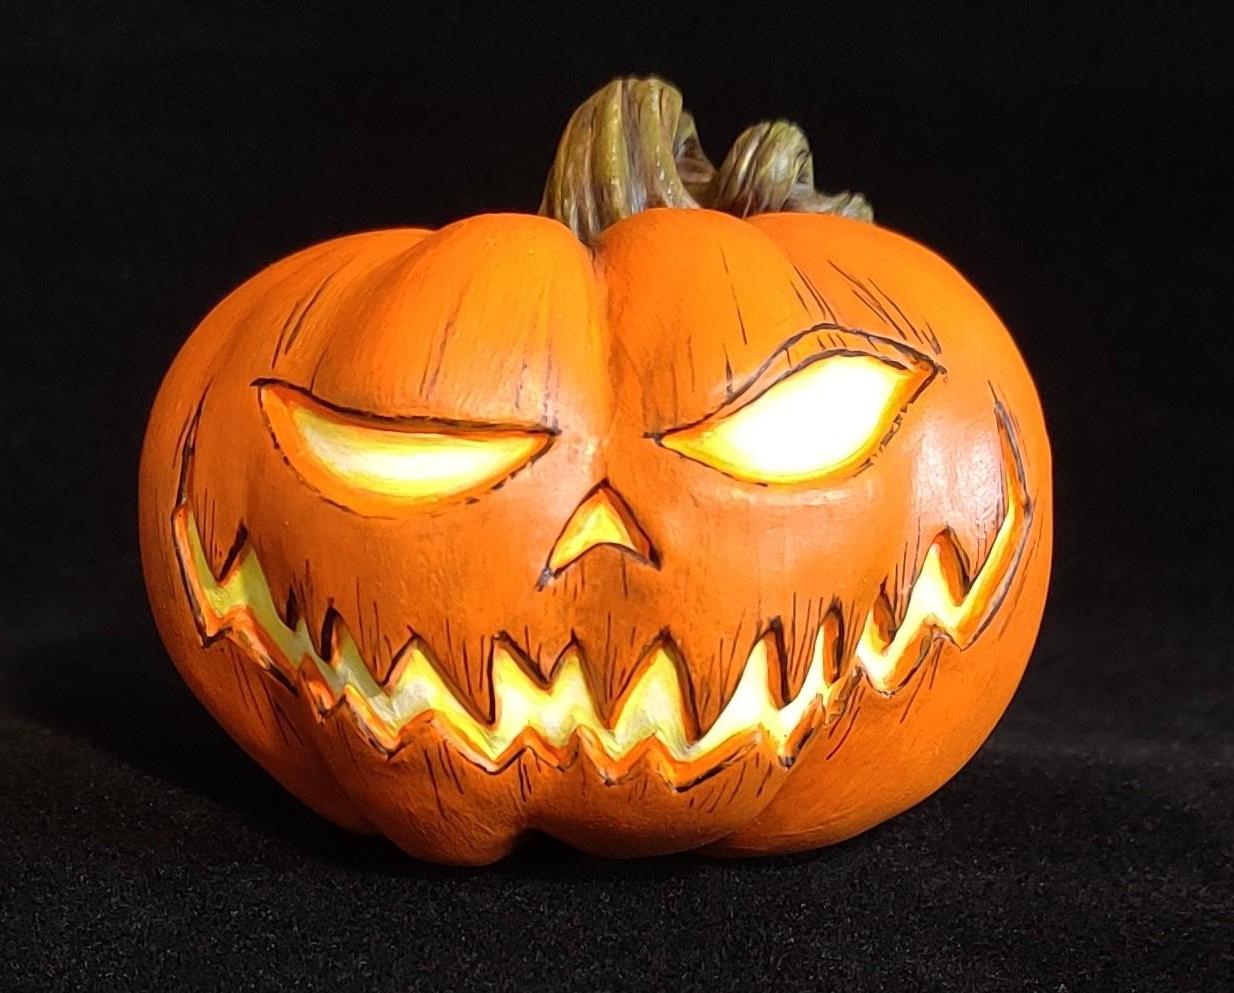 Sculpting and Painting a Polymer Clay Jack-O'-Lantern